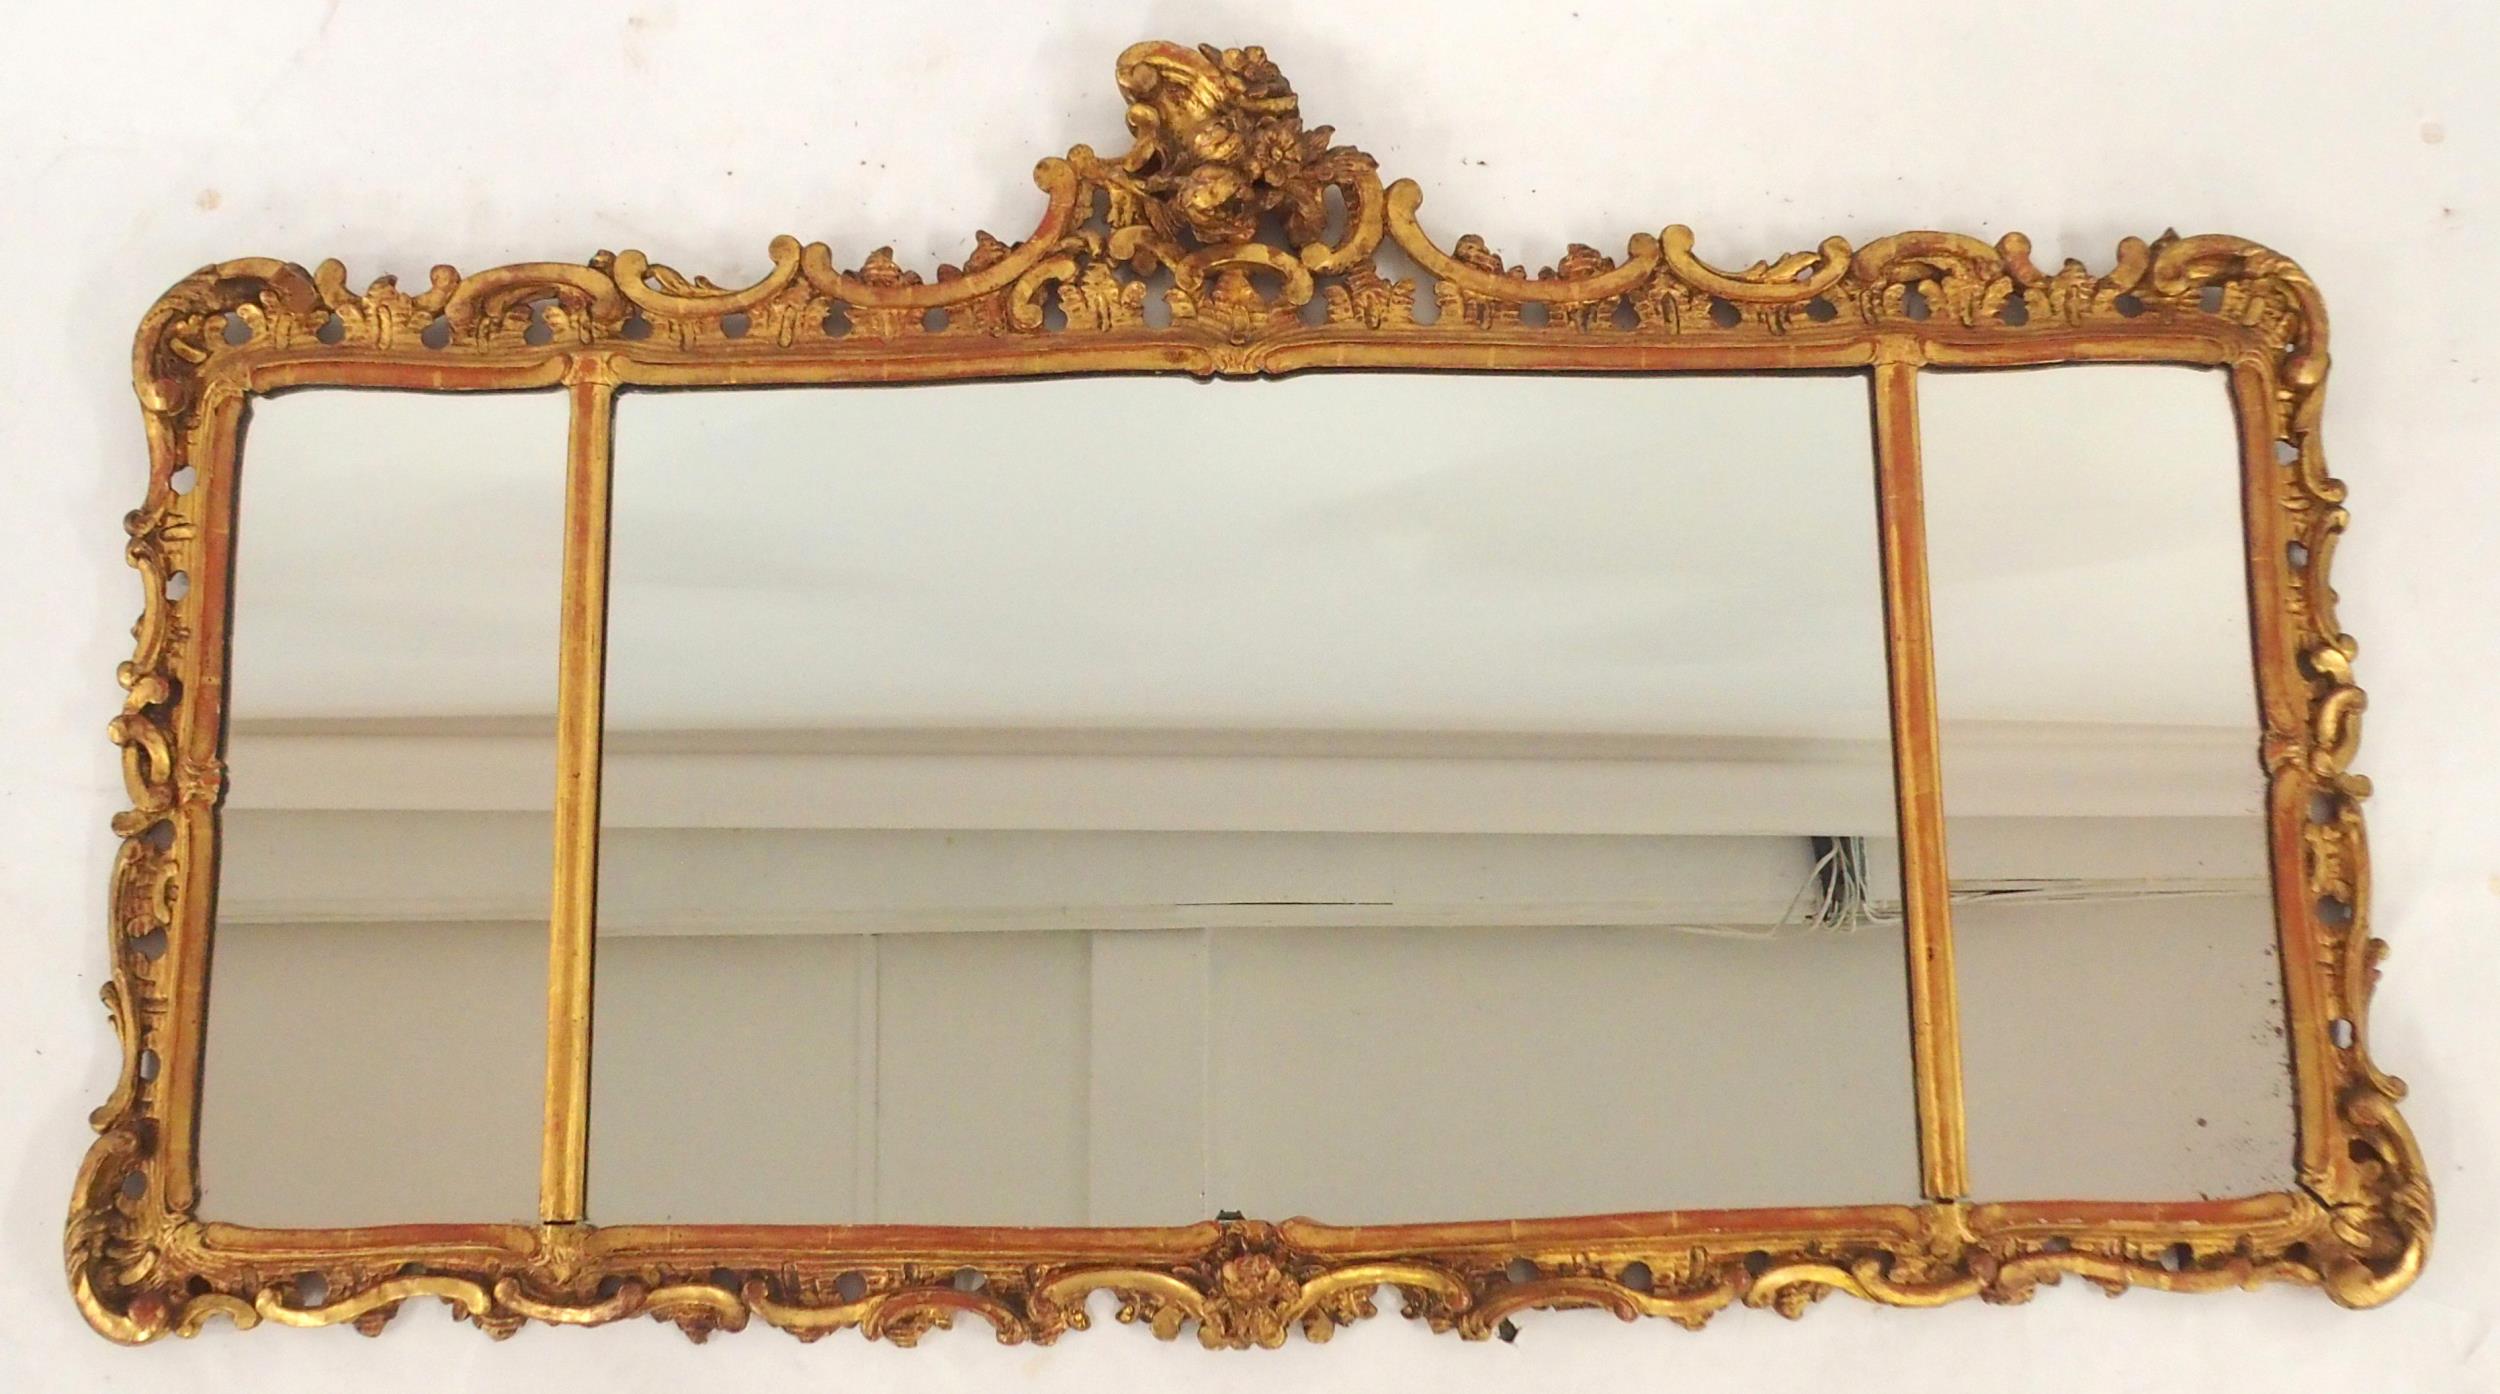 AN 18TH CENTURY STYLE GILTWOOD ROCOCO STYLE TRIPLE PLATE WALL MIRROR with floral surmount over